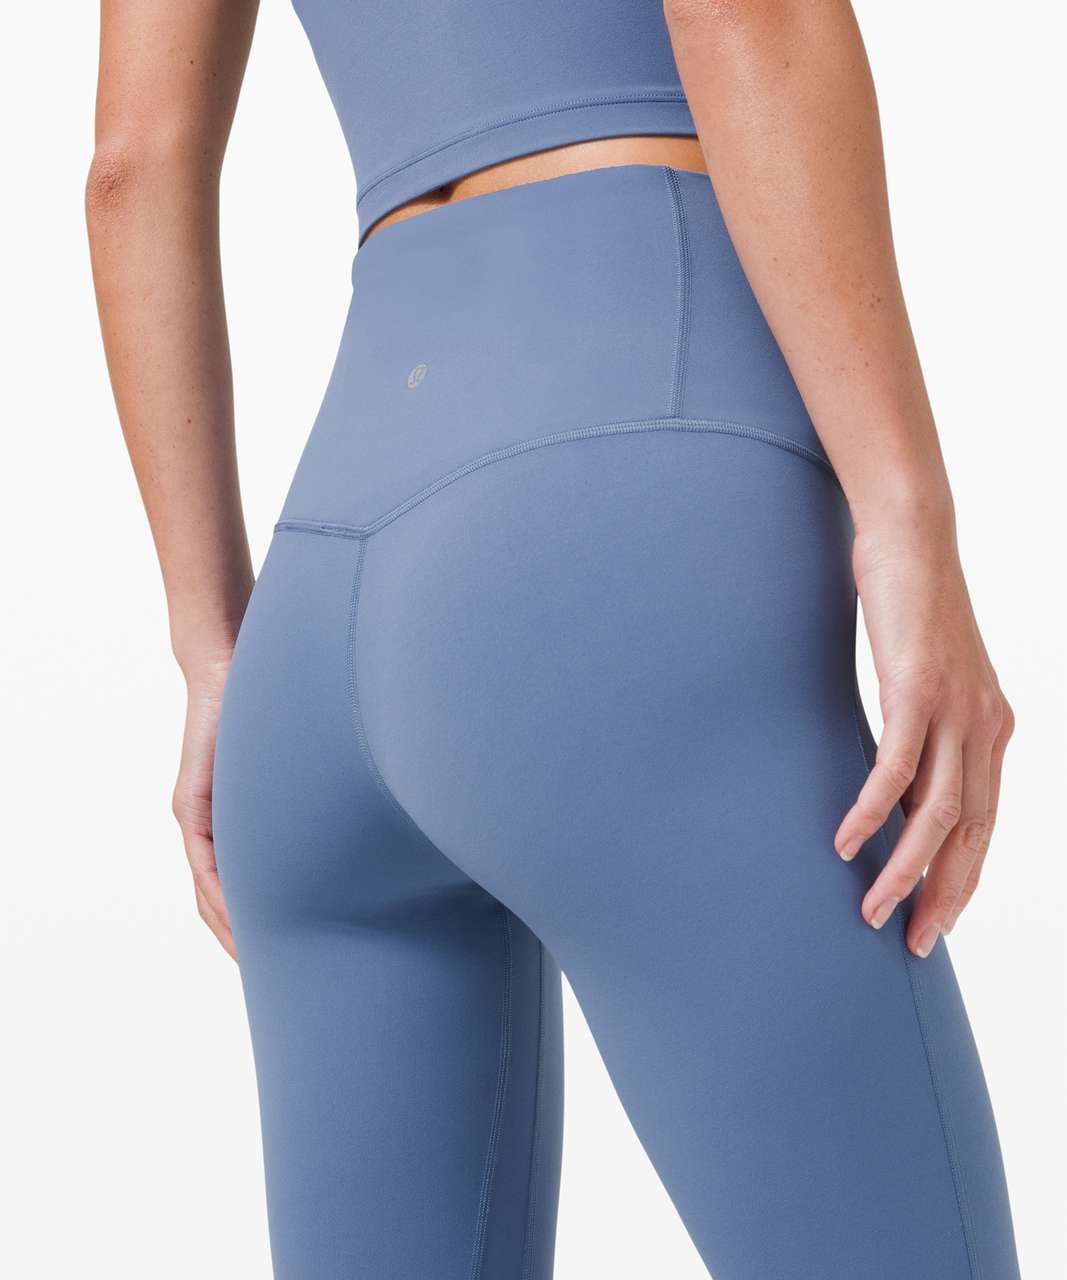 Lululemon Unlimit High-Rise Tight 25 - Black (First Release